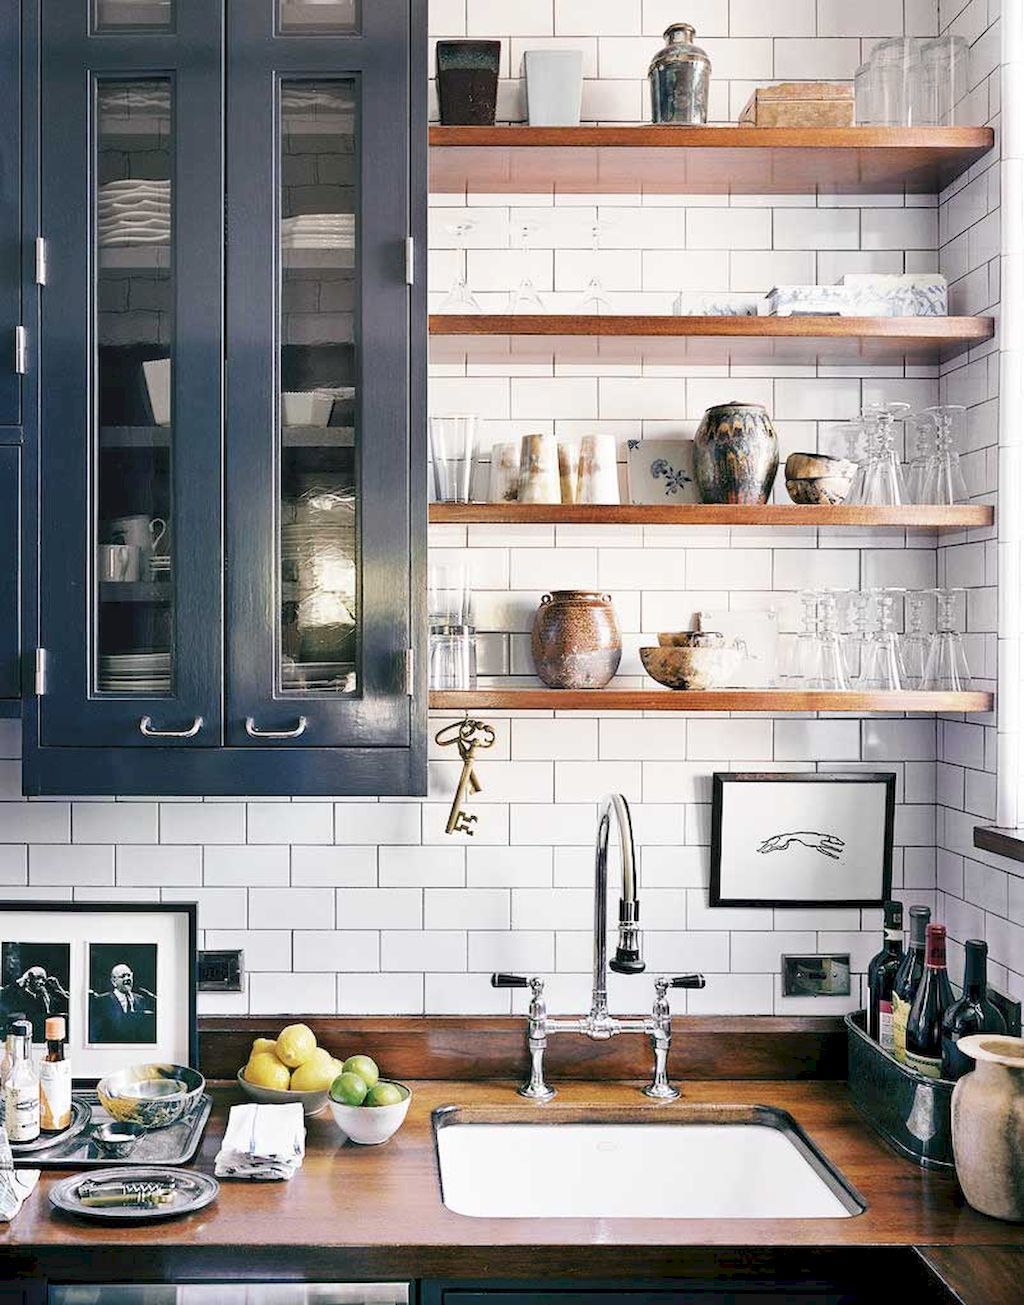 top eclectic kitchen ideas killer shelves floating the and counter are totally matching looking for some rad open shelving check out our website inspo guitar shelf stackable units